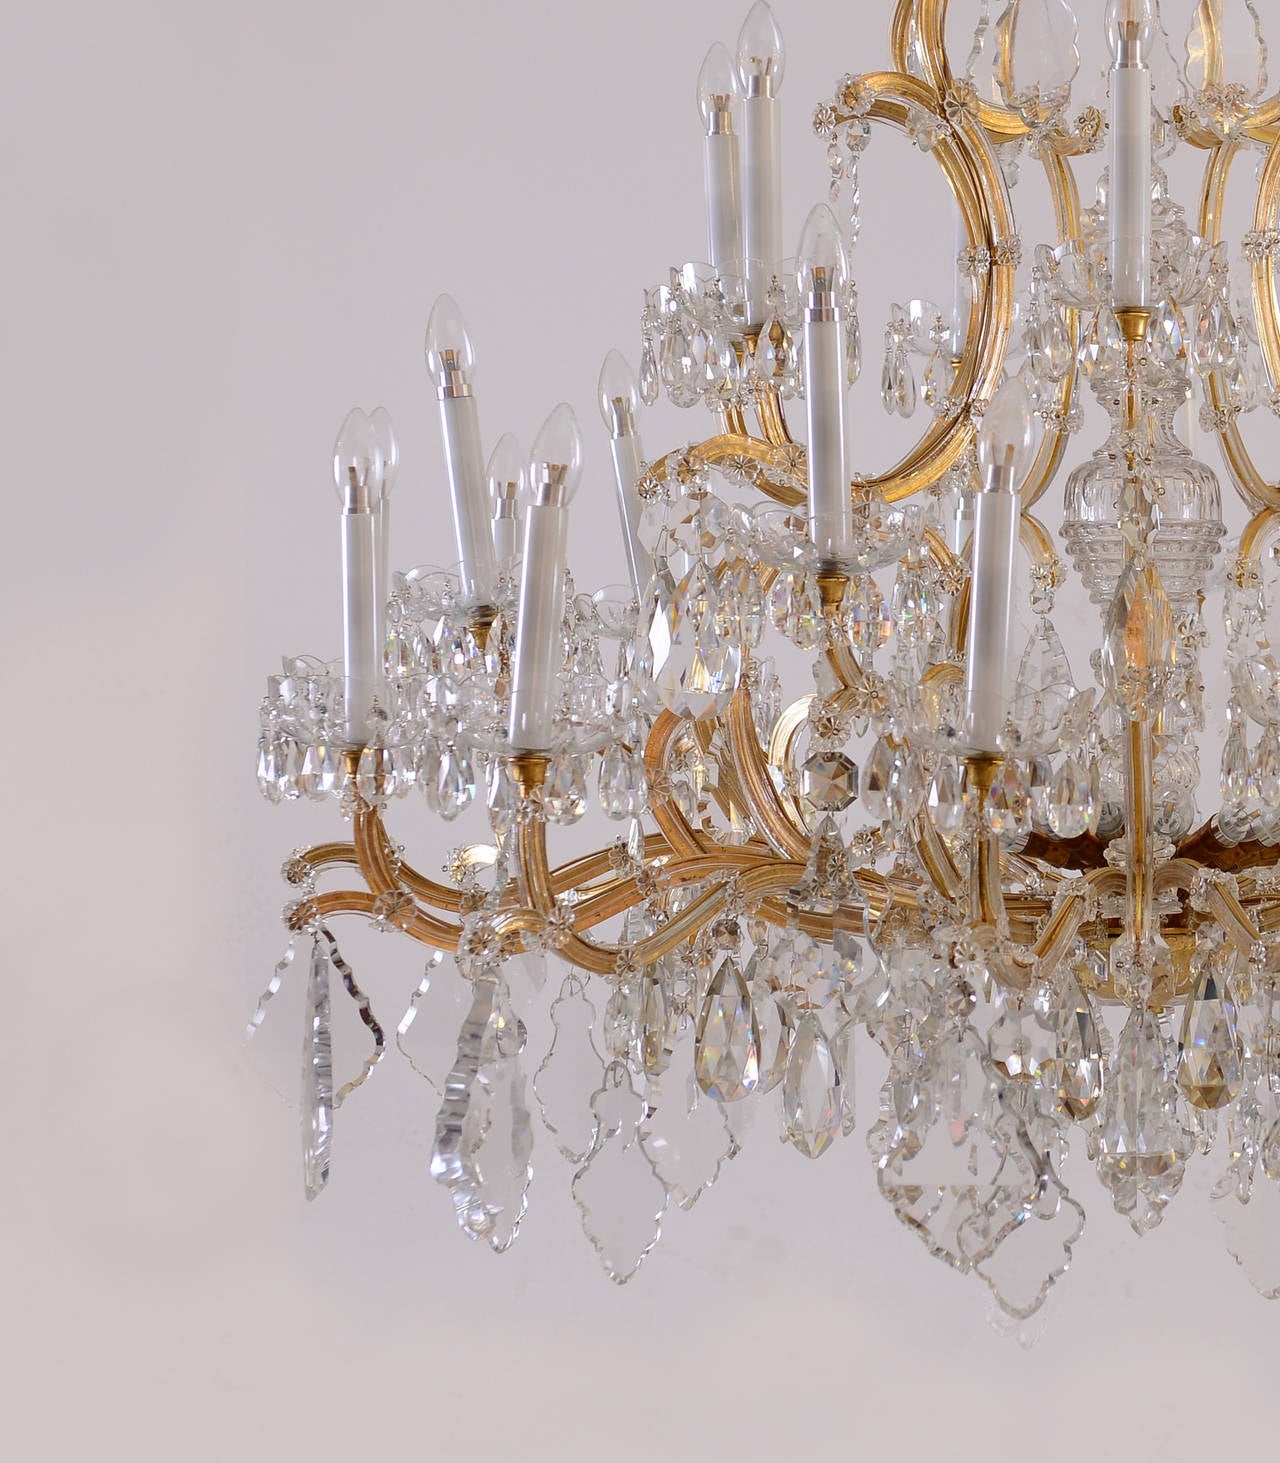 Early 20th Century Original Large Lobmeyr, Maria Theresien Style Parlor Chandelier, 1910/20